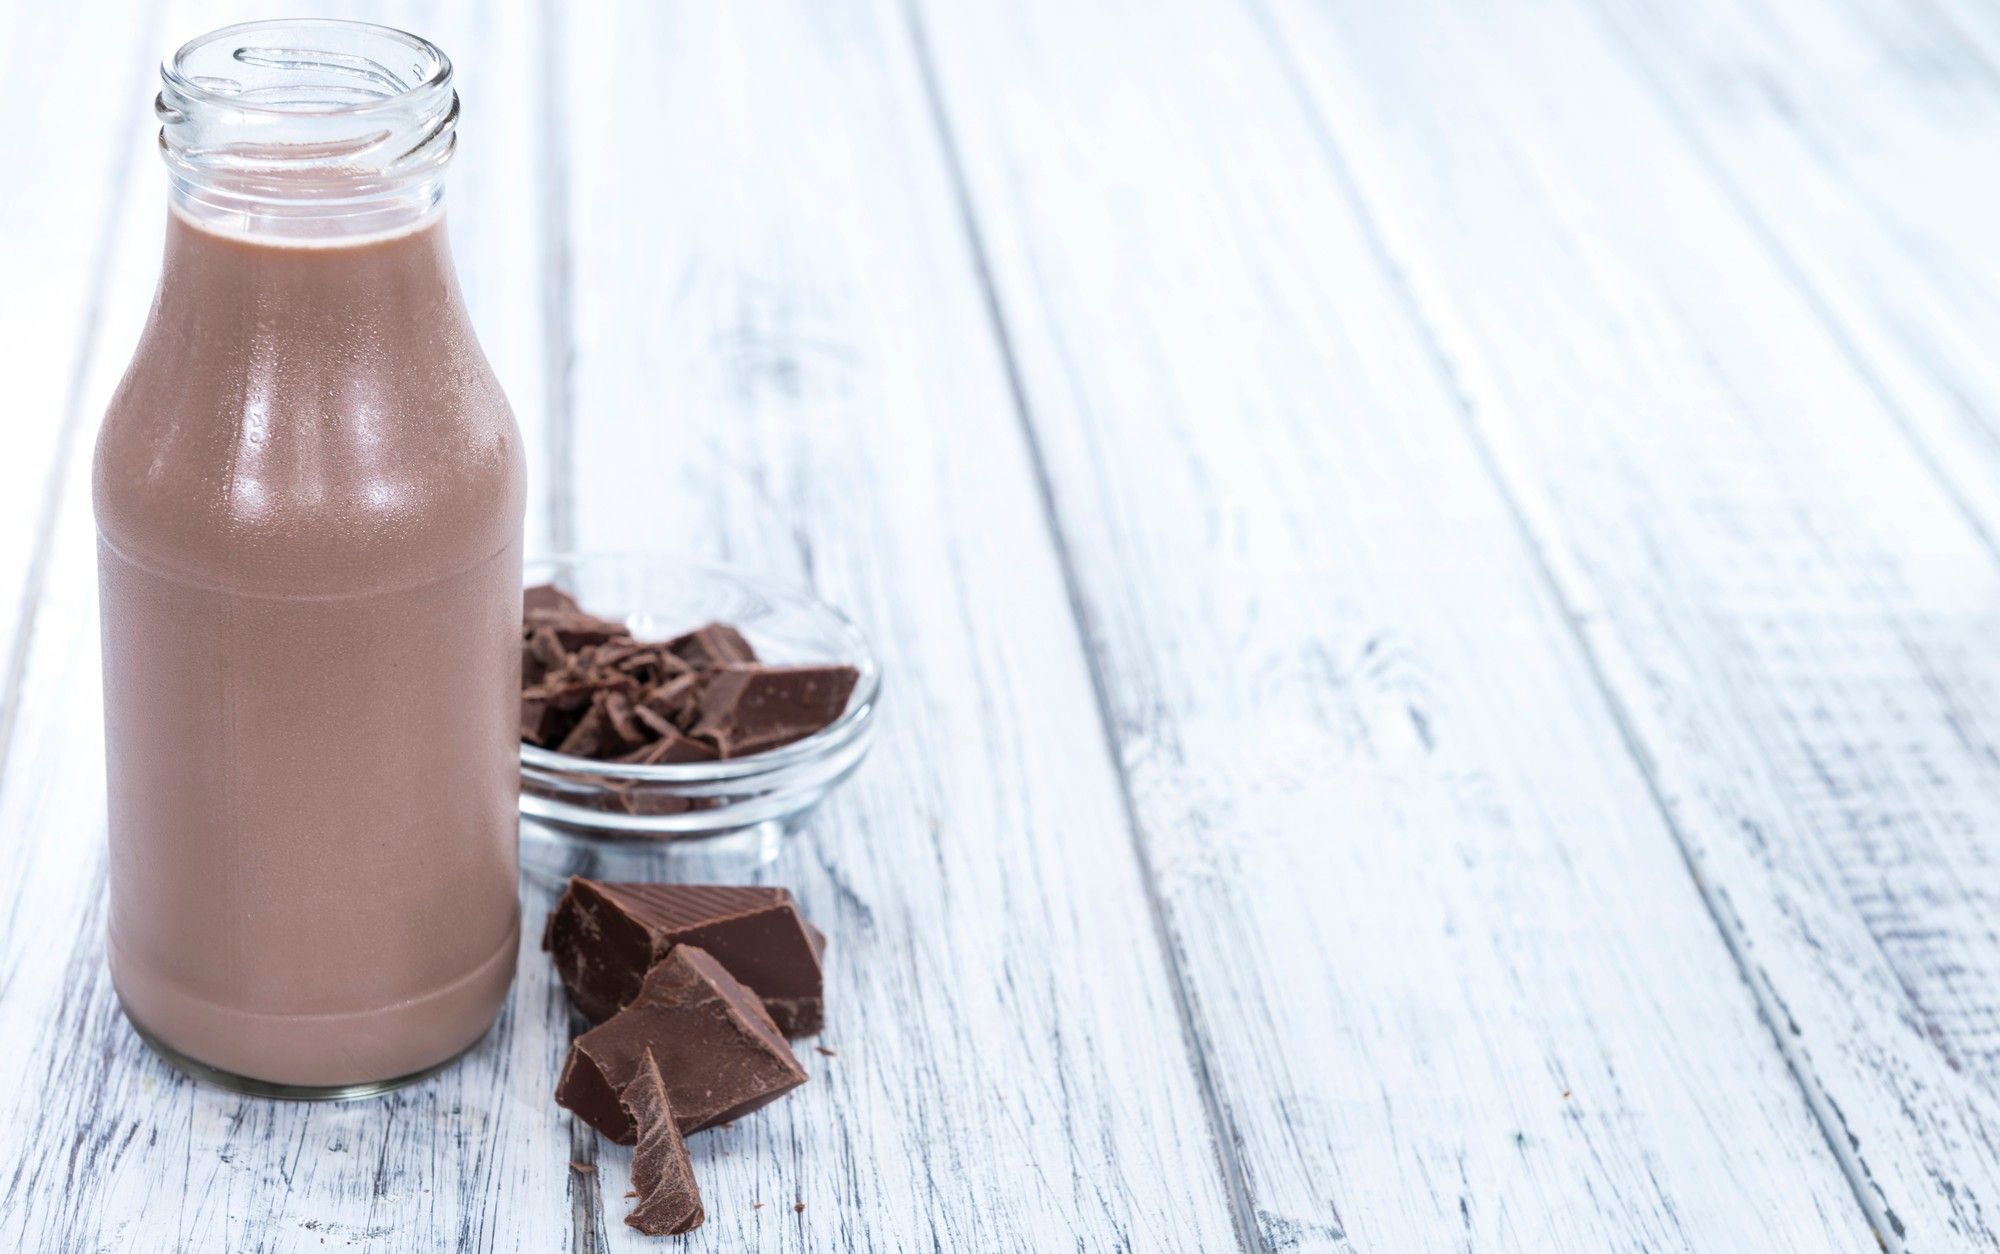 Nestle Nesquik chocolate milk allegedly contains undisclosed artificial flavors.